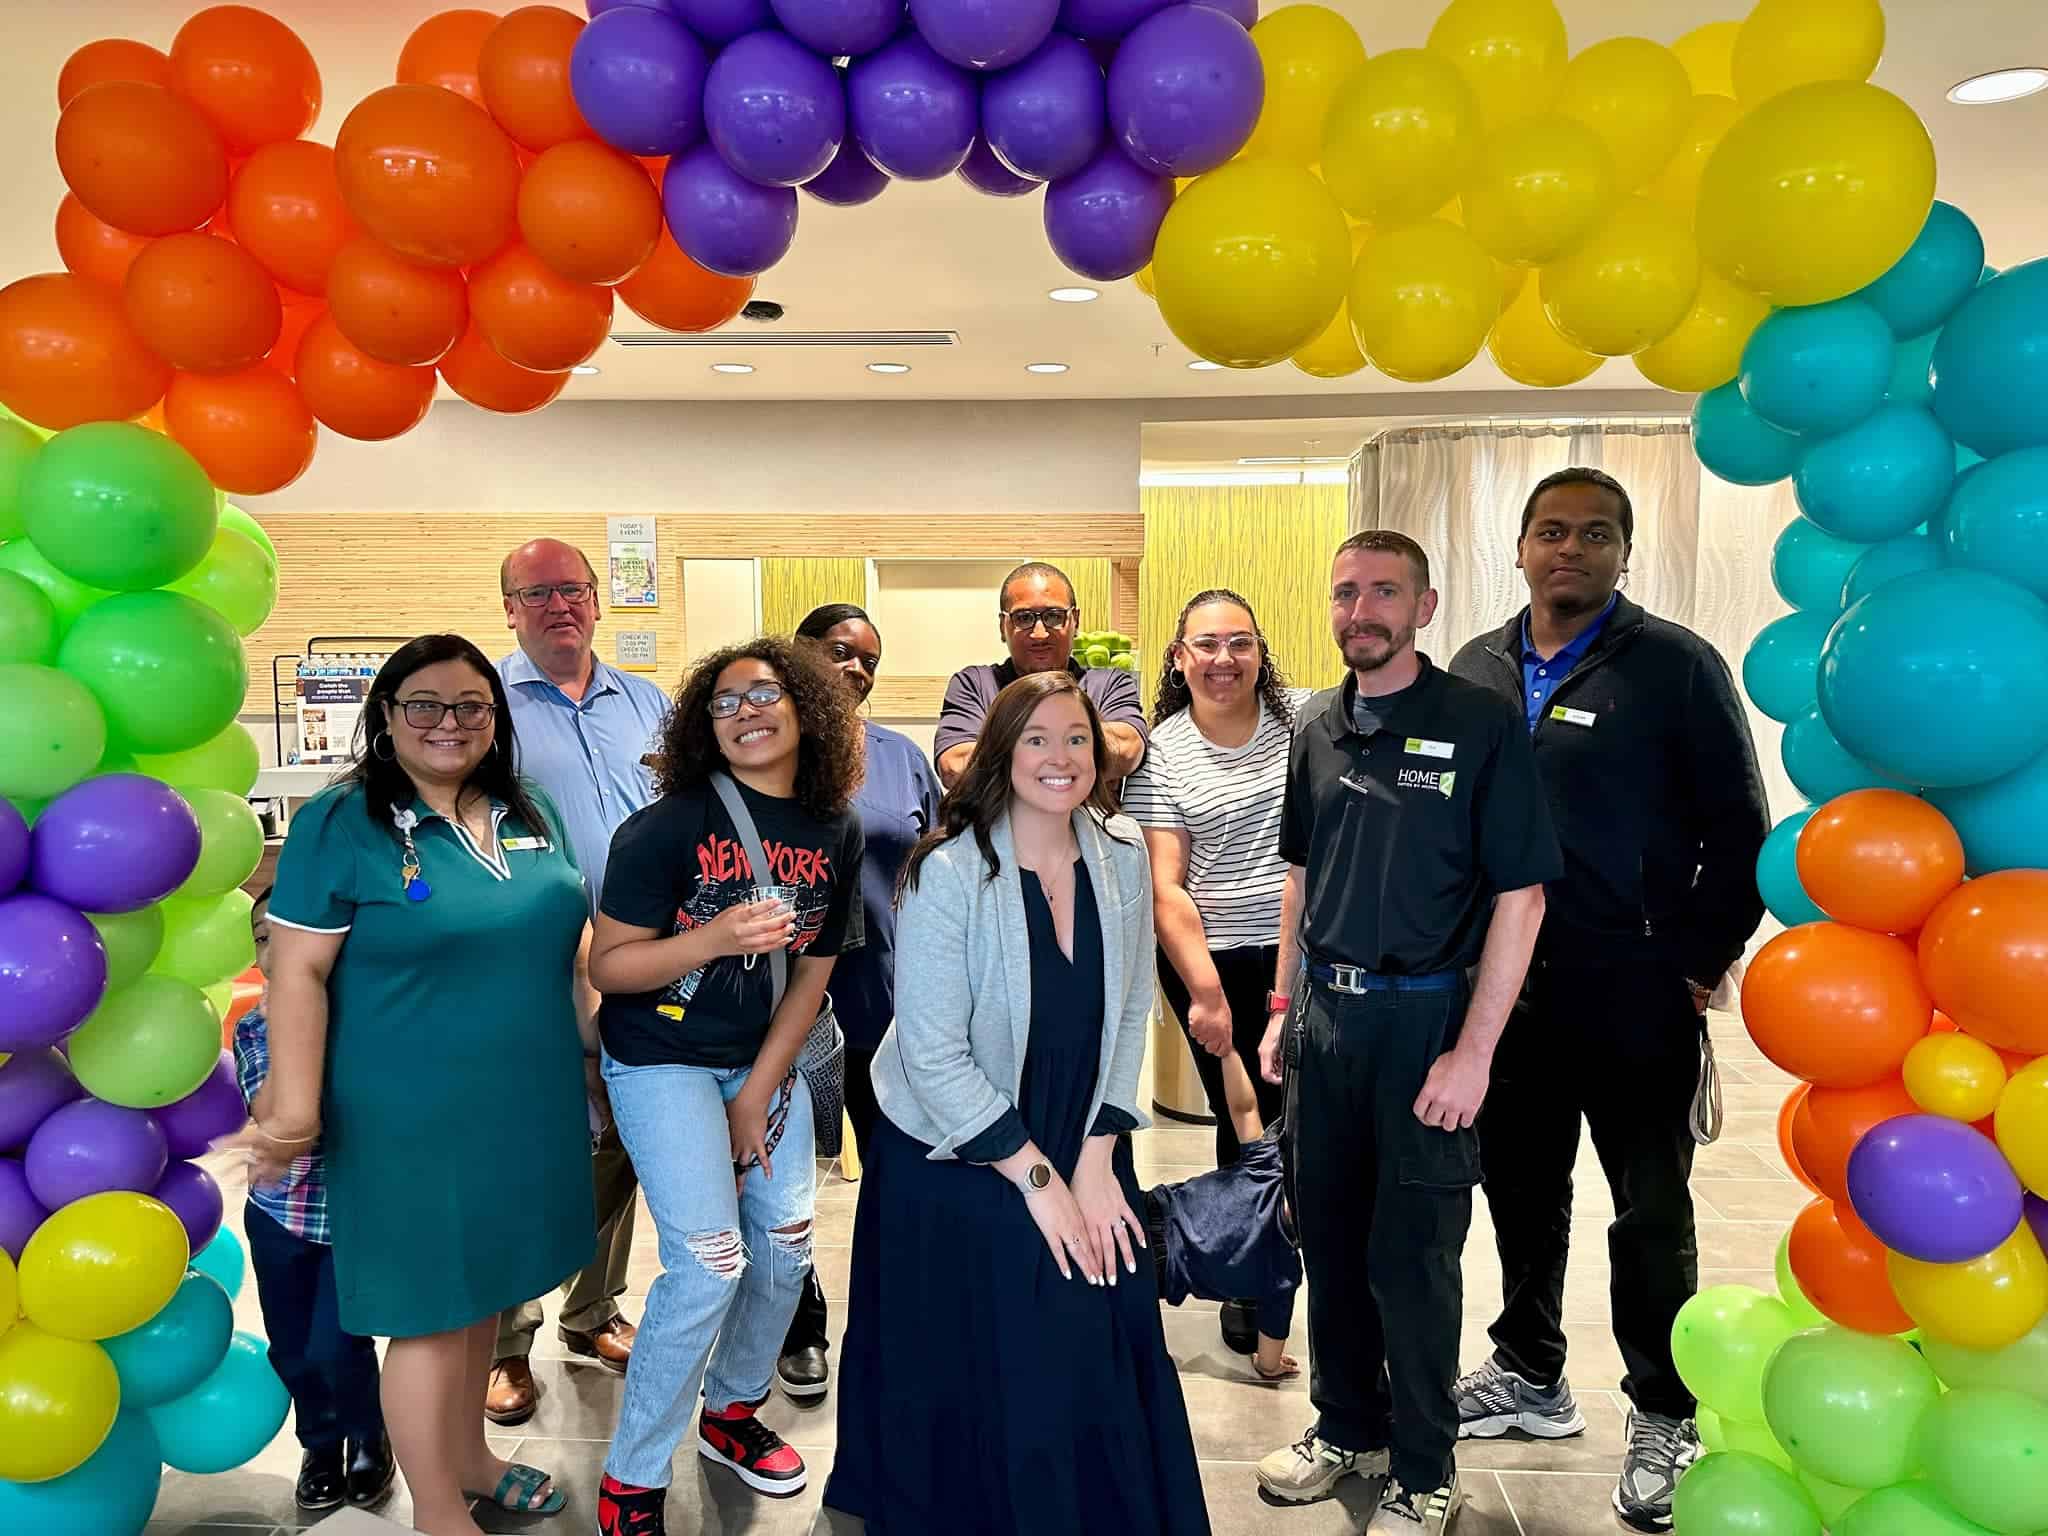 The staff of Home2 Suites by Hilton, Poughkeepsie smiling and standing under a balloon arch.